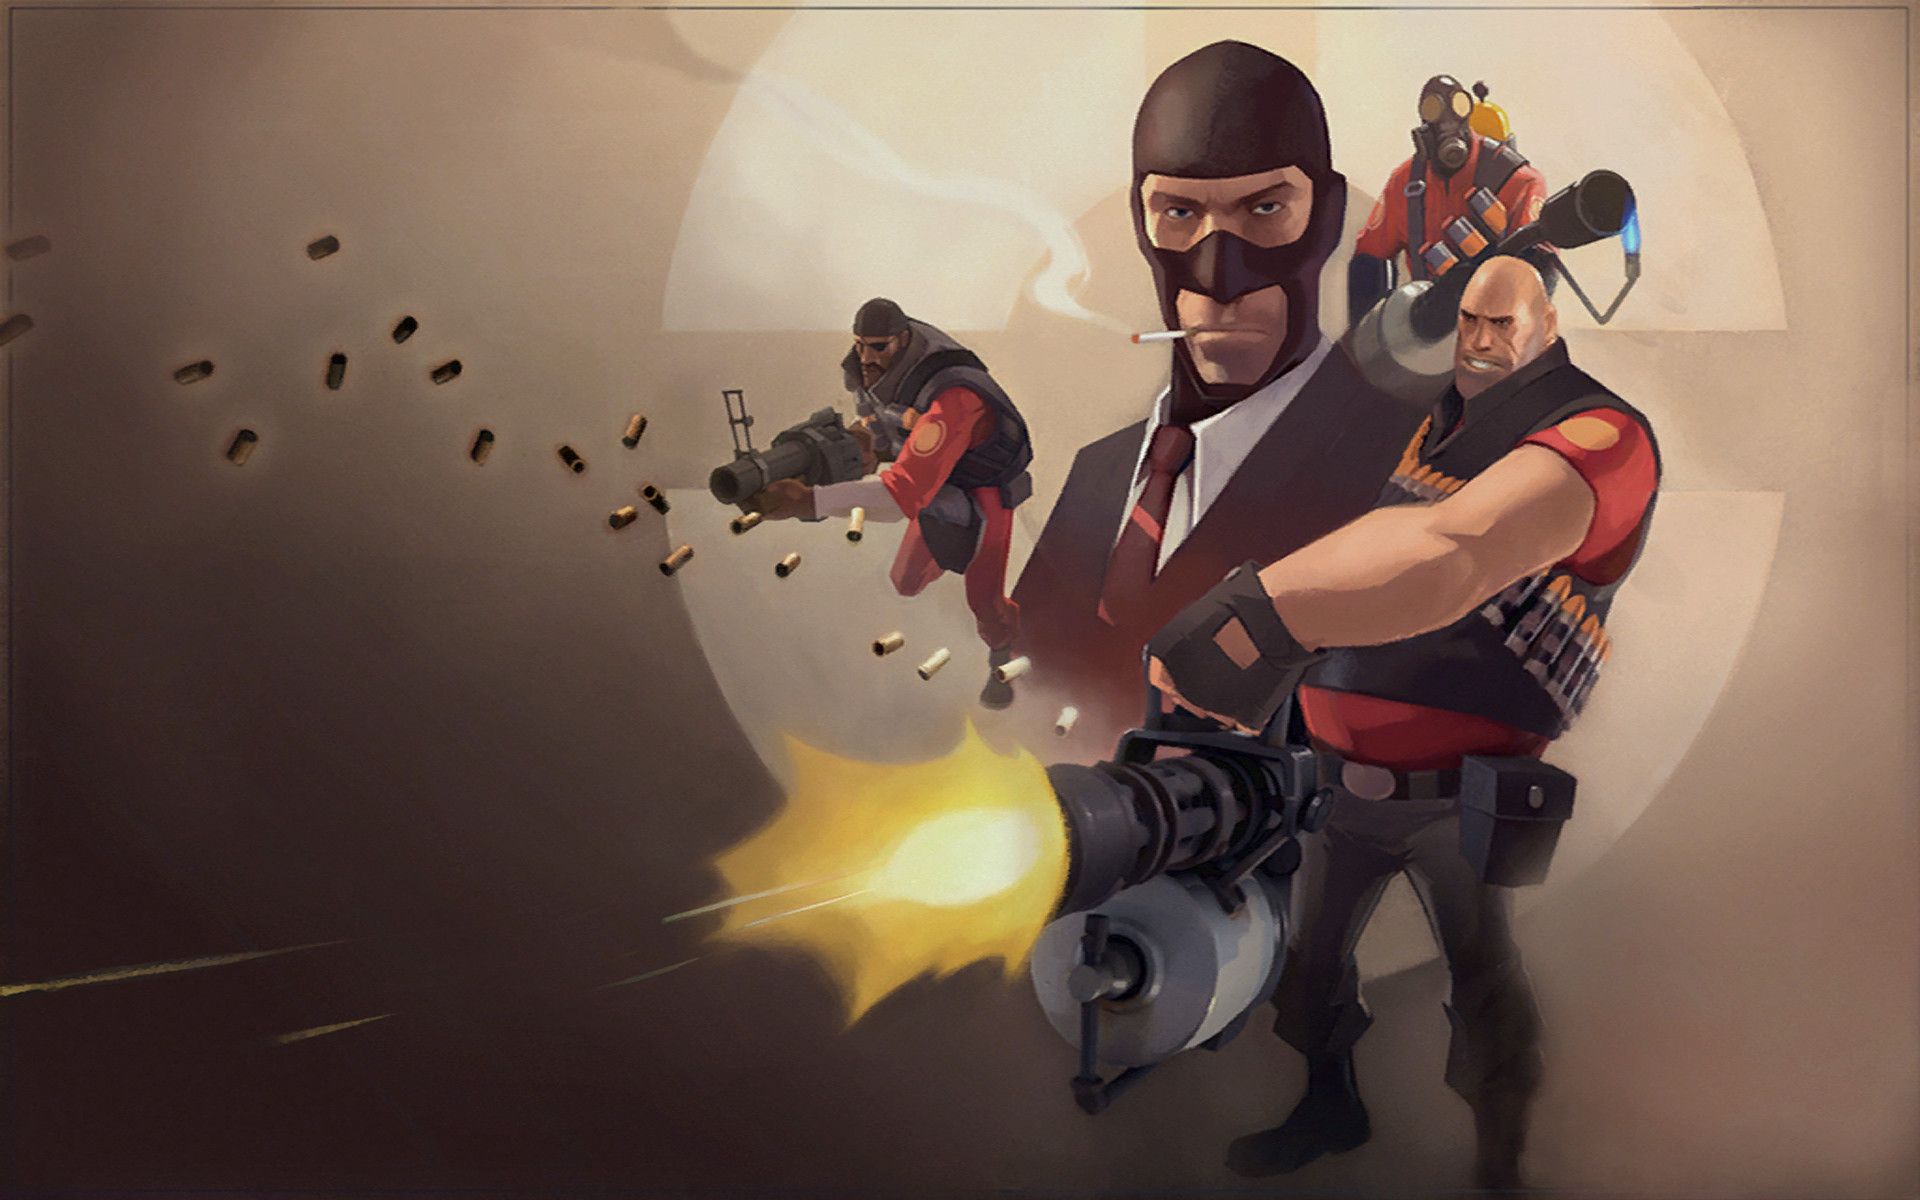 HD wallpaper mobile game application Tracer Team Fortress 2 4K   Wallpaper Flare